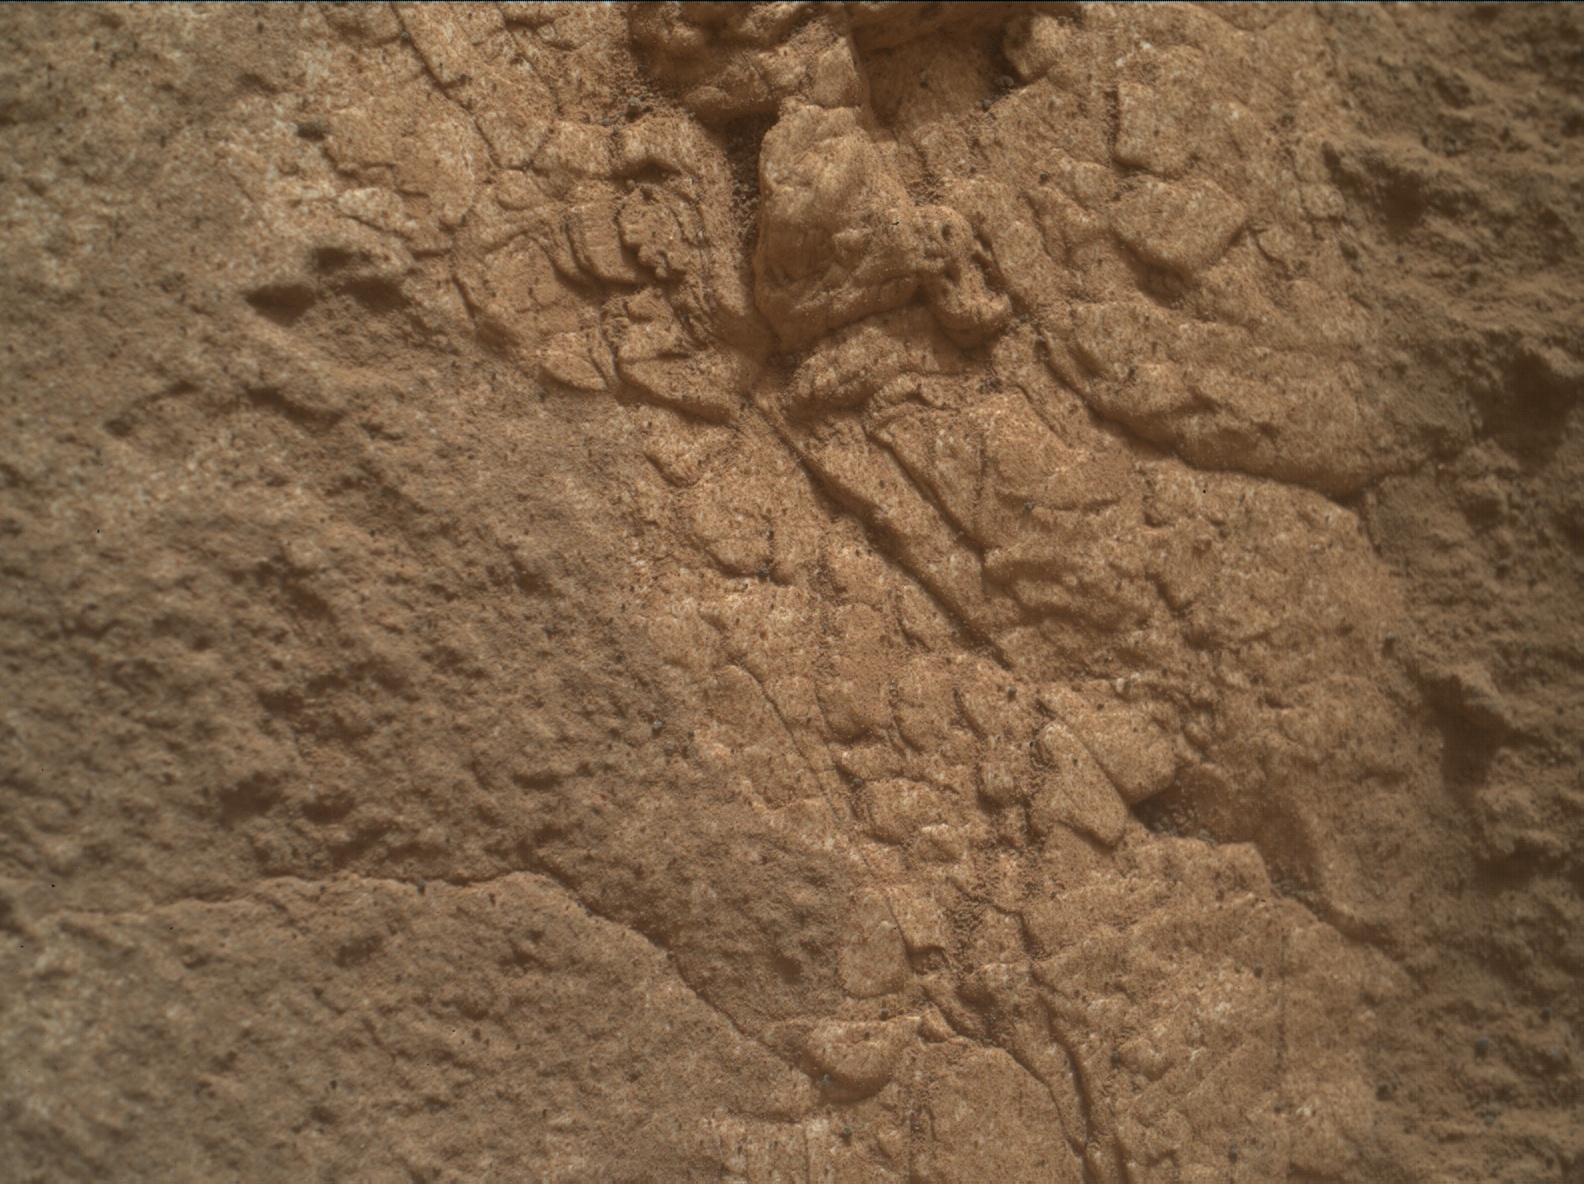 Nasa's Mars rover Curiosity acquired this image using its Mars Hand Lens Imager (MAHLI) on Sol 3459